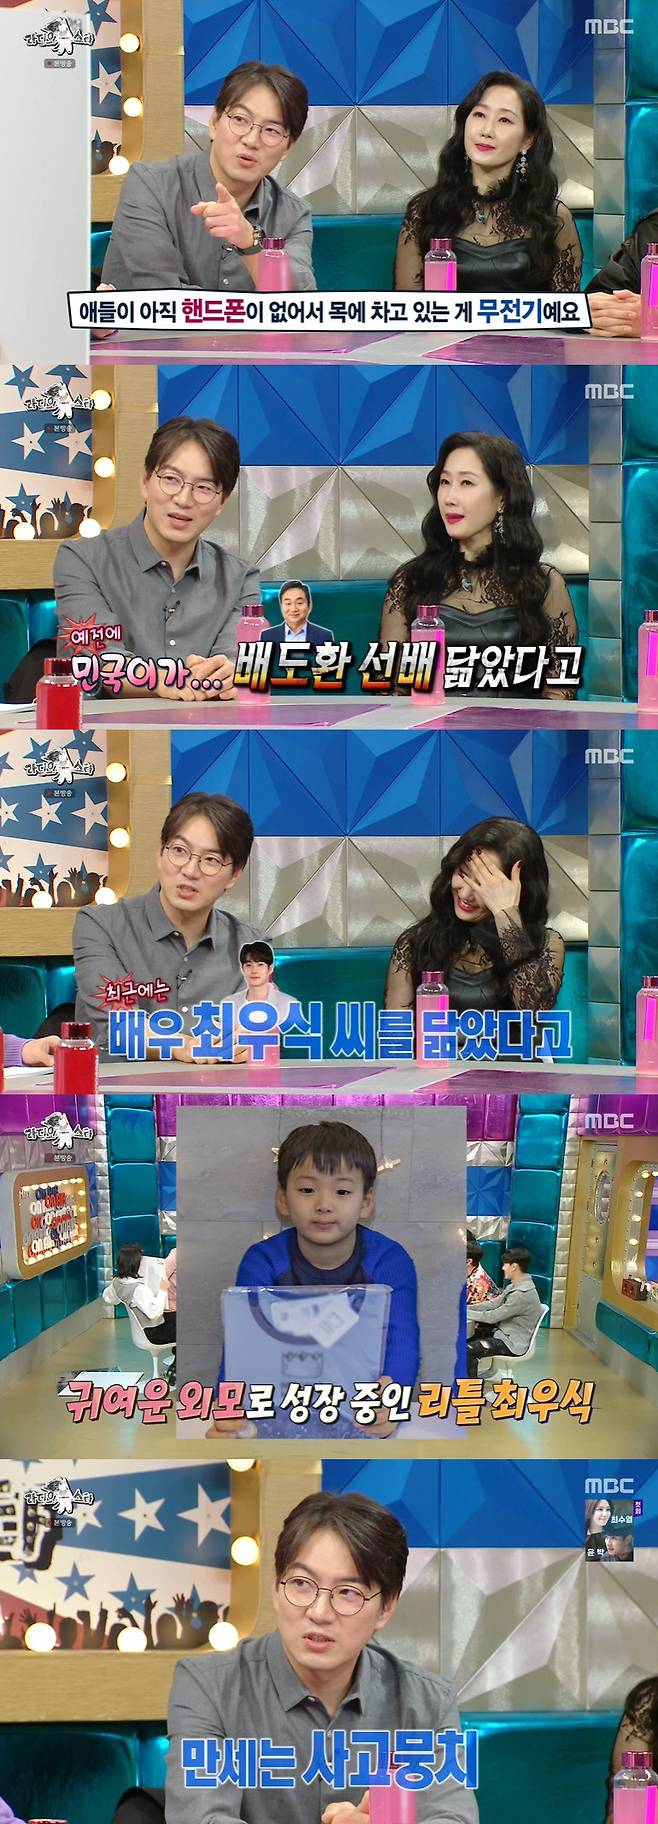 Radio Star Song Il-gook revealed the current status of the three Twins who became fourth graders.In MBC Radio Star broadcasted on the 16th, Song Il-gook, Ship line, Jung Dong-won, Jo Hye-ryun, and Trix appeared as guests.Song Il-gook, who appeared on Radio Star for the first time, revealed the current status of Three Twins, who became a fourth grader in elementary school. Song Il-gook said, The foot size is 265mm.Kim Gu said, Have not the kids been puberty yet? Song Il-gook said, I do not want to talk about it.Kim Gu said, I think Daehan is inciting his younger siblings.Three Twins, who grew up without knowing it, were released. Three Twins boasted a stretched leg as if they had grown up.Song Il-gook said, The children do not have a cell phone yet. It is a walkie-talkie that is hanging around their necks. They carry a walkie-talkie because they can not lose it. There is no plan yet.I still have three friends, so I do not feel the need because I play well with them. Song Il-gook said, Min-guk Lee resembled Do-hwan Bae.Do-hwan Bae came to the wedding ceremony and said, Please give birth to a child who resembles me. Now it looks like Choi Woo-shik.Song Il-gook said, Daehan is a militarist. He already has a GFriend.Father has a lot of gray hair, he said, you are in a bad mood, and said, So my grandmother has a lot of gray hair. Song Il-gook said, Hurray is a troublemaker. He is curious and looks like me. Kim Gu asked, Are all the kids studying well? Song Il-gook laughed silently.Song Il-gook said, Children eat a large pizza, and when you go to a sushi restaurant, you get a lot of dishes.Song Il-gook said, What my wife always talks about is that you have to earn a lot to feed the kids. To do that, you should not eat.Sung Eun Father Song Il-gook. Song Il-gook said, It takes three days to lose 10kg, but it takes three days to lose 10kg.I went to eat makguksu with my parents, but I rubbed it, and it disappeared. I do not rub it. I just drink it.Song Il-gook also revealed his child-rearing know-how. Song Il-gook said, I am a person who does not have a lot of talent. I think it is fortunate that I succeeded as an actor. My mother has a lot of anti-Japanese movement related events.Ive been to a lot of anti-Japanese sites with my mother, so I think its not because Im lucky, but because my ancestors lived well. I think its a reward to keep my family well and live my life faithfully.As part of that, I was trying to do well for my children. Song Il-gook got a lot of responses from the child-rearing methods such as Thinking chair, Waiting for 10 seconds, and Discipline in a place without people at the time of Superman Returns.In response, Song Il-gook said, Actually, my wife set everything up. My wife does the childcare and I do it with my body. I change diapers or dress children.I think some of them have succeeded (in Shuldol) because the children are dressed beautifully, he said.